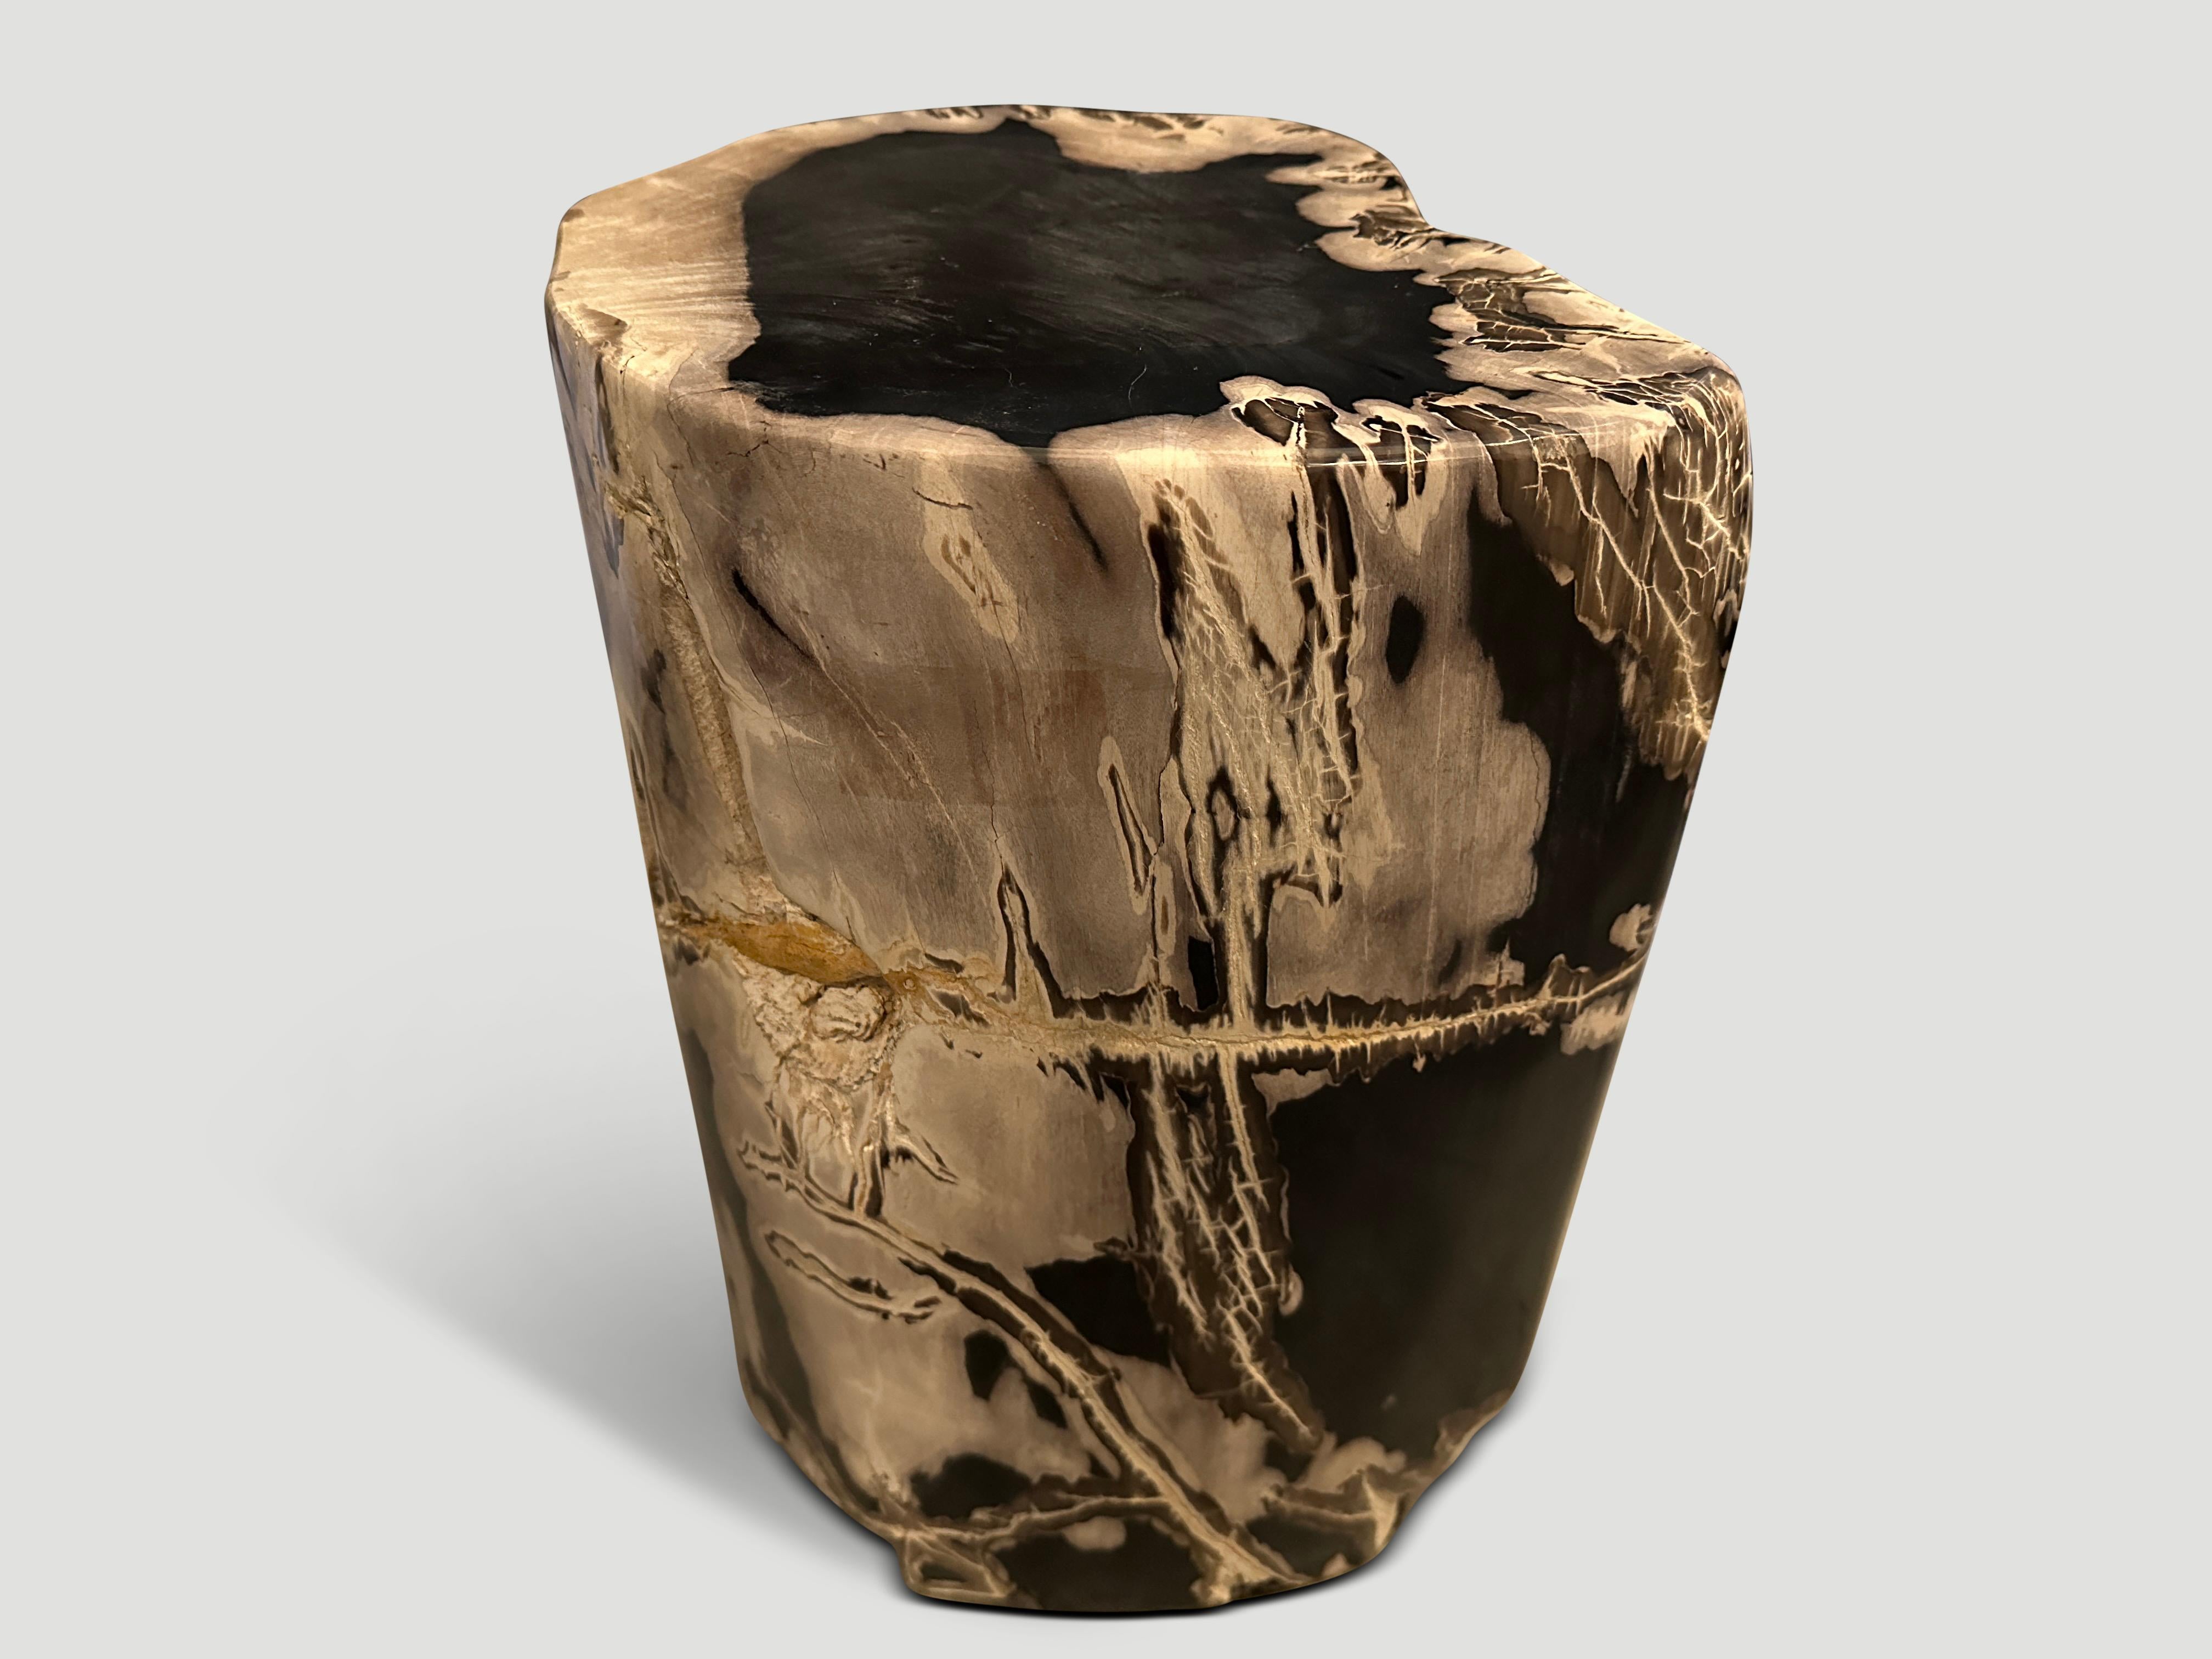 Beautiful tones and markings on this impressive high quality petrified wood side table. It’s fascinating how Mother Nature produces these exquisite 40 million year old petrified teak logs with such contrasting colors and natural patterns throughout.